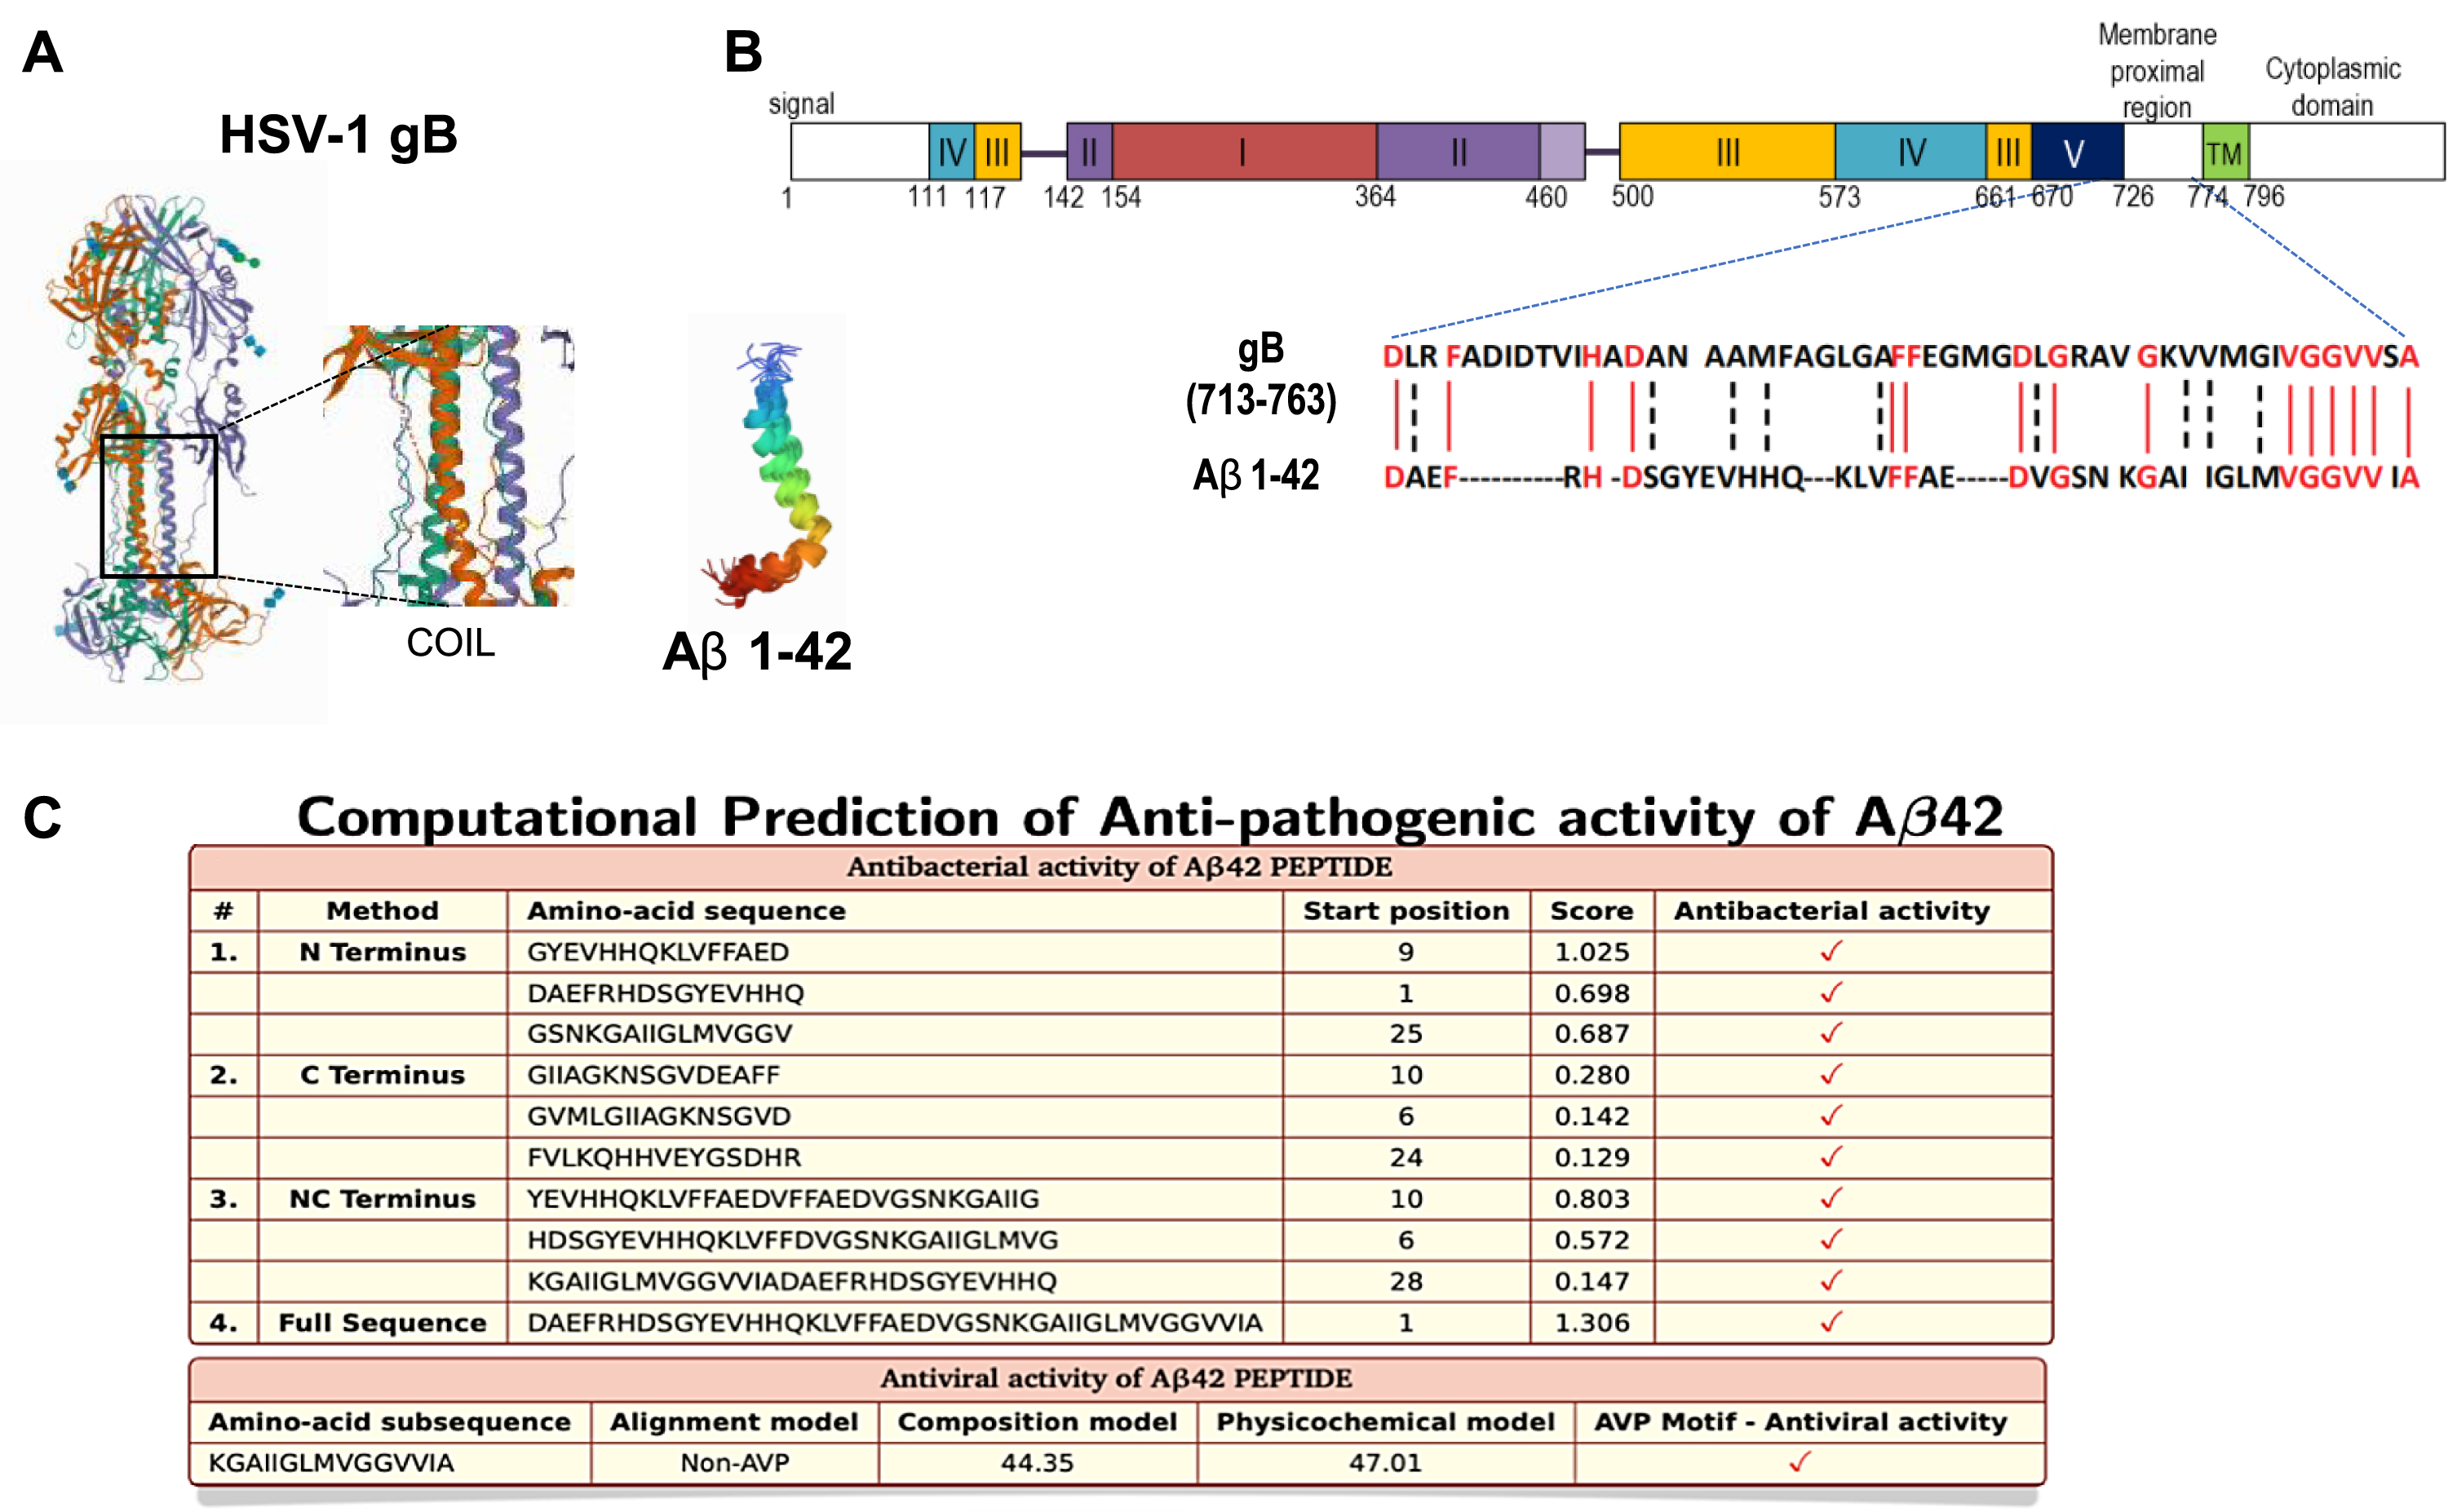 Molecular structure, sequence alignment, and anti-pathogenic property of Aβ. A) 3D crystal structure of HSV-1-gB and Aβ42; data from PDB (RCSB Protein Data Bank, http://www.rcsb.org) are shown using PyMol software. Center panel shows zoom on HSV-1 gB intermembrane sequence with formed coils. B) Sequence alignment between HSV-1-gB and Aβ42 (using PyMol software). C) Prediction of amino-acid sub sequences of Aβ42 possessing antibacterial activity via AntiBP2 software (http://crdd.osdd.net/raghava/antibp2) and antiviral activity with AVPpred software (http://crdd.osdd.net/servers/avppred).